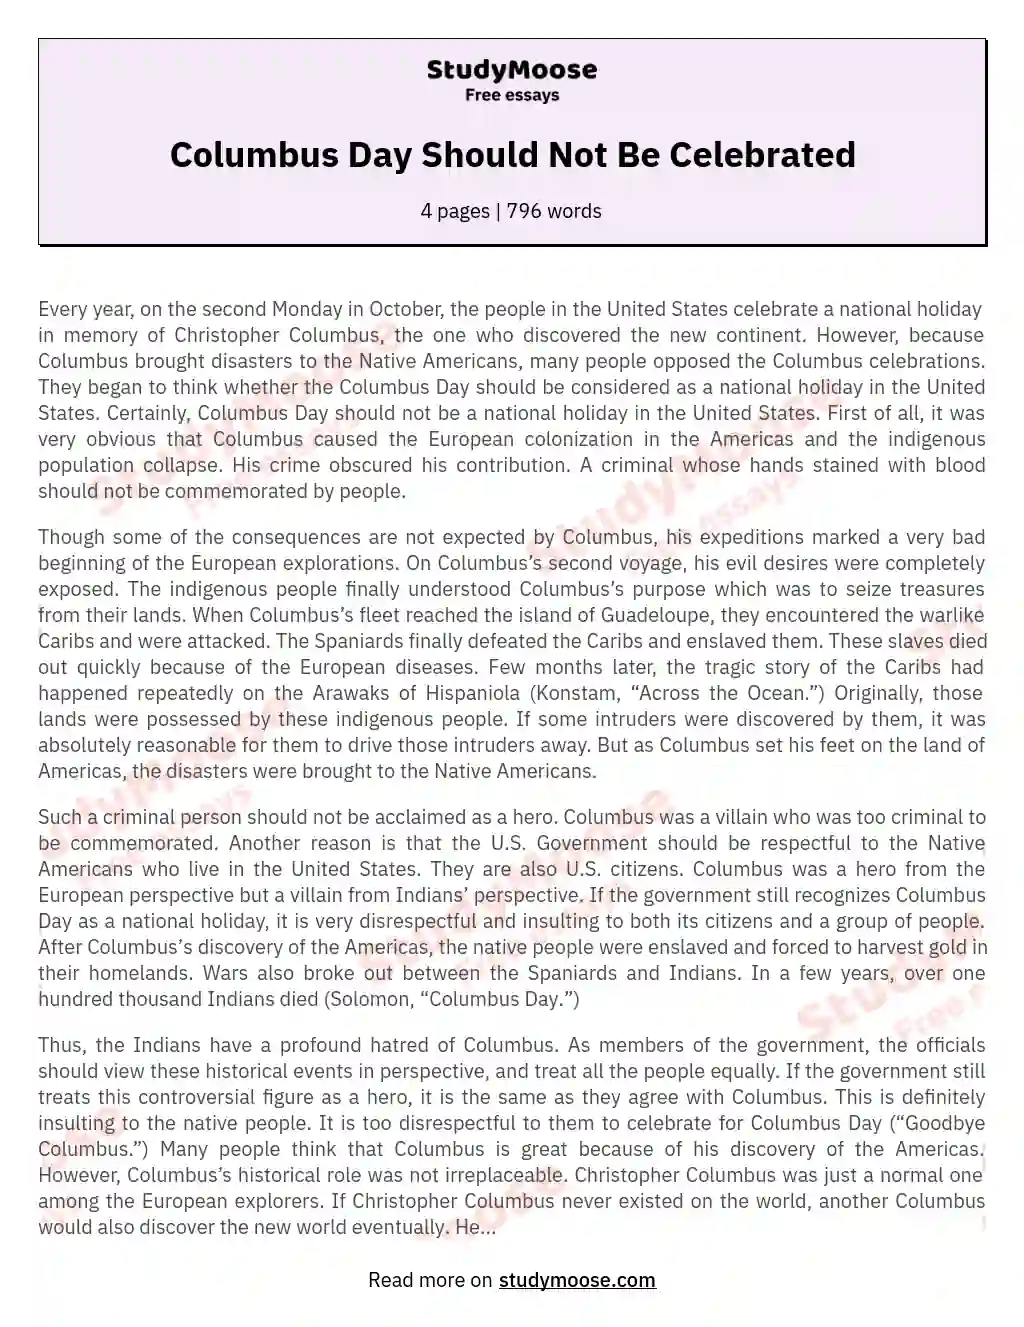 Columbus Day Should Not Be Celebrated essay